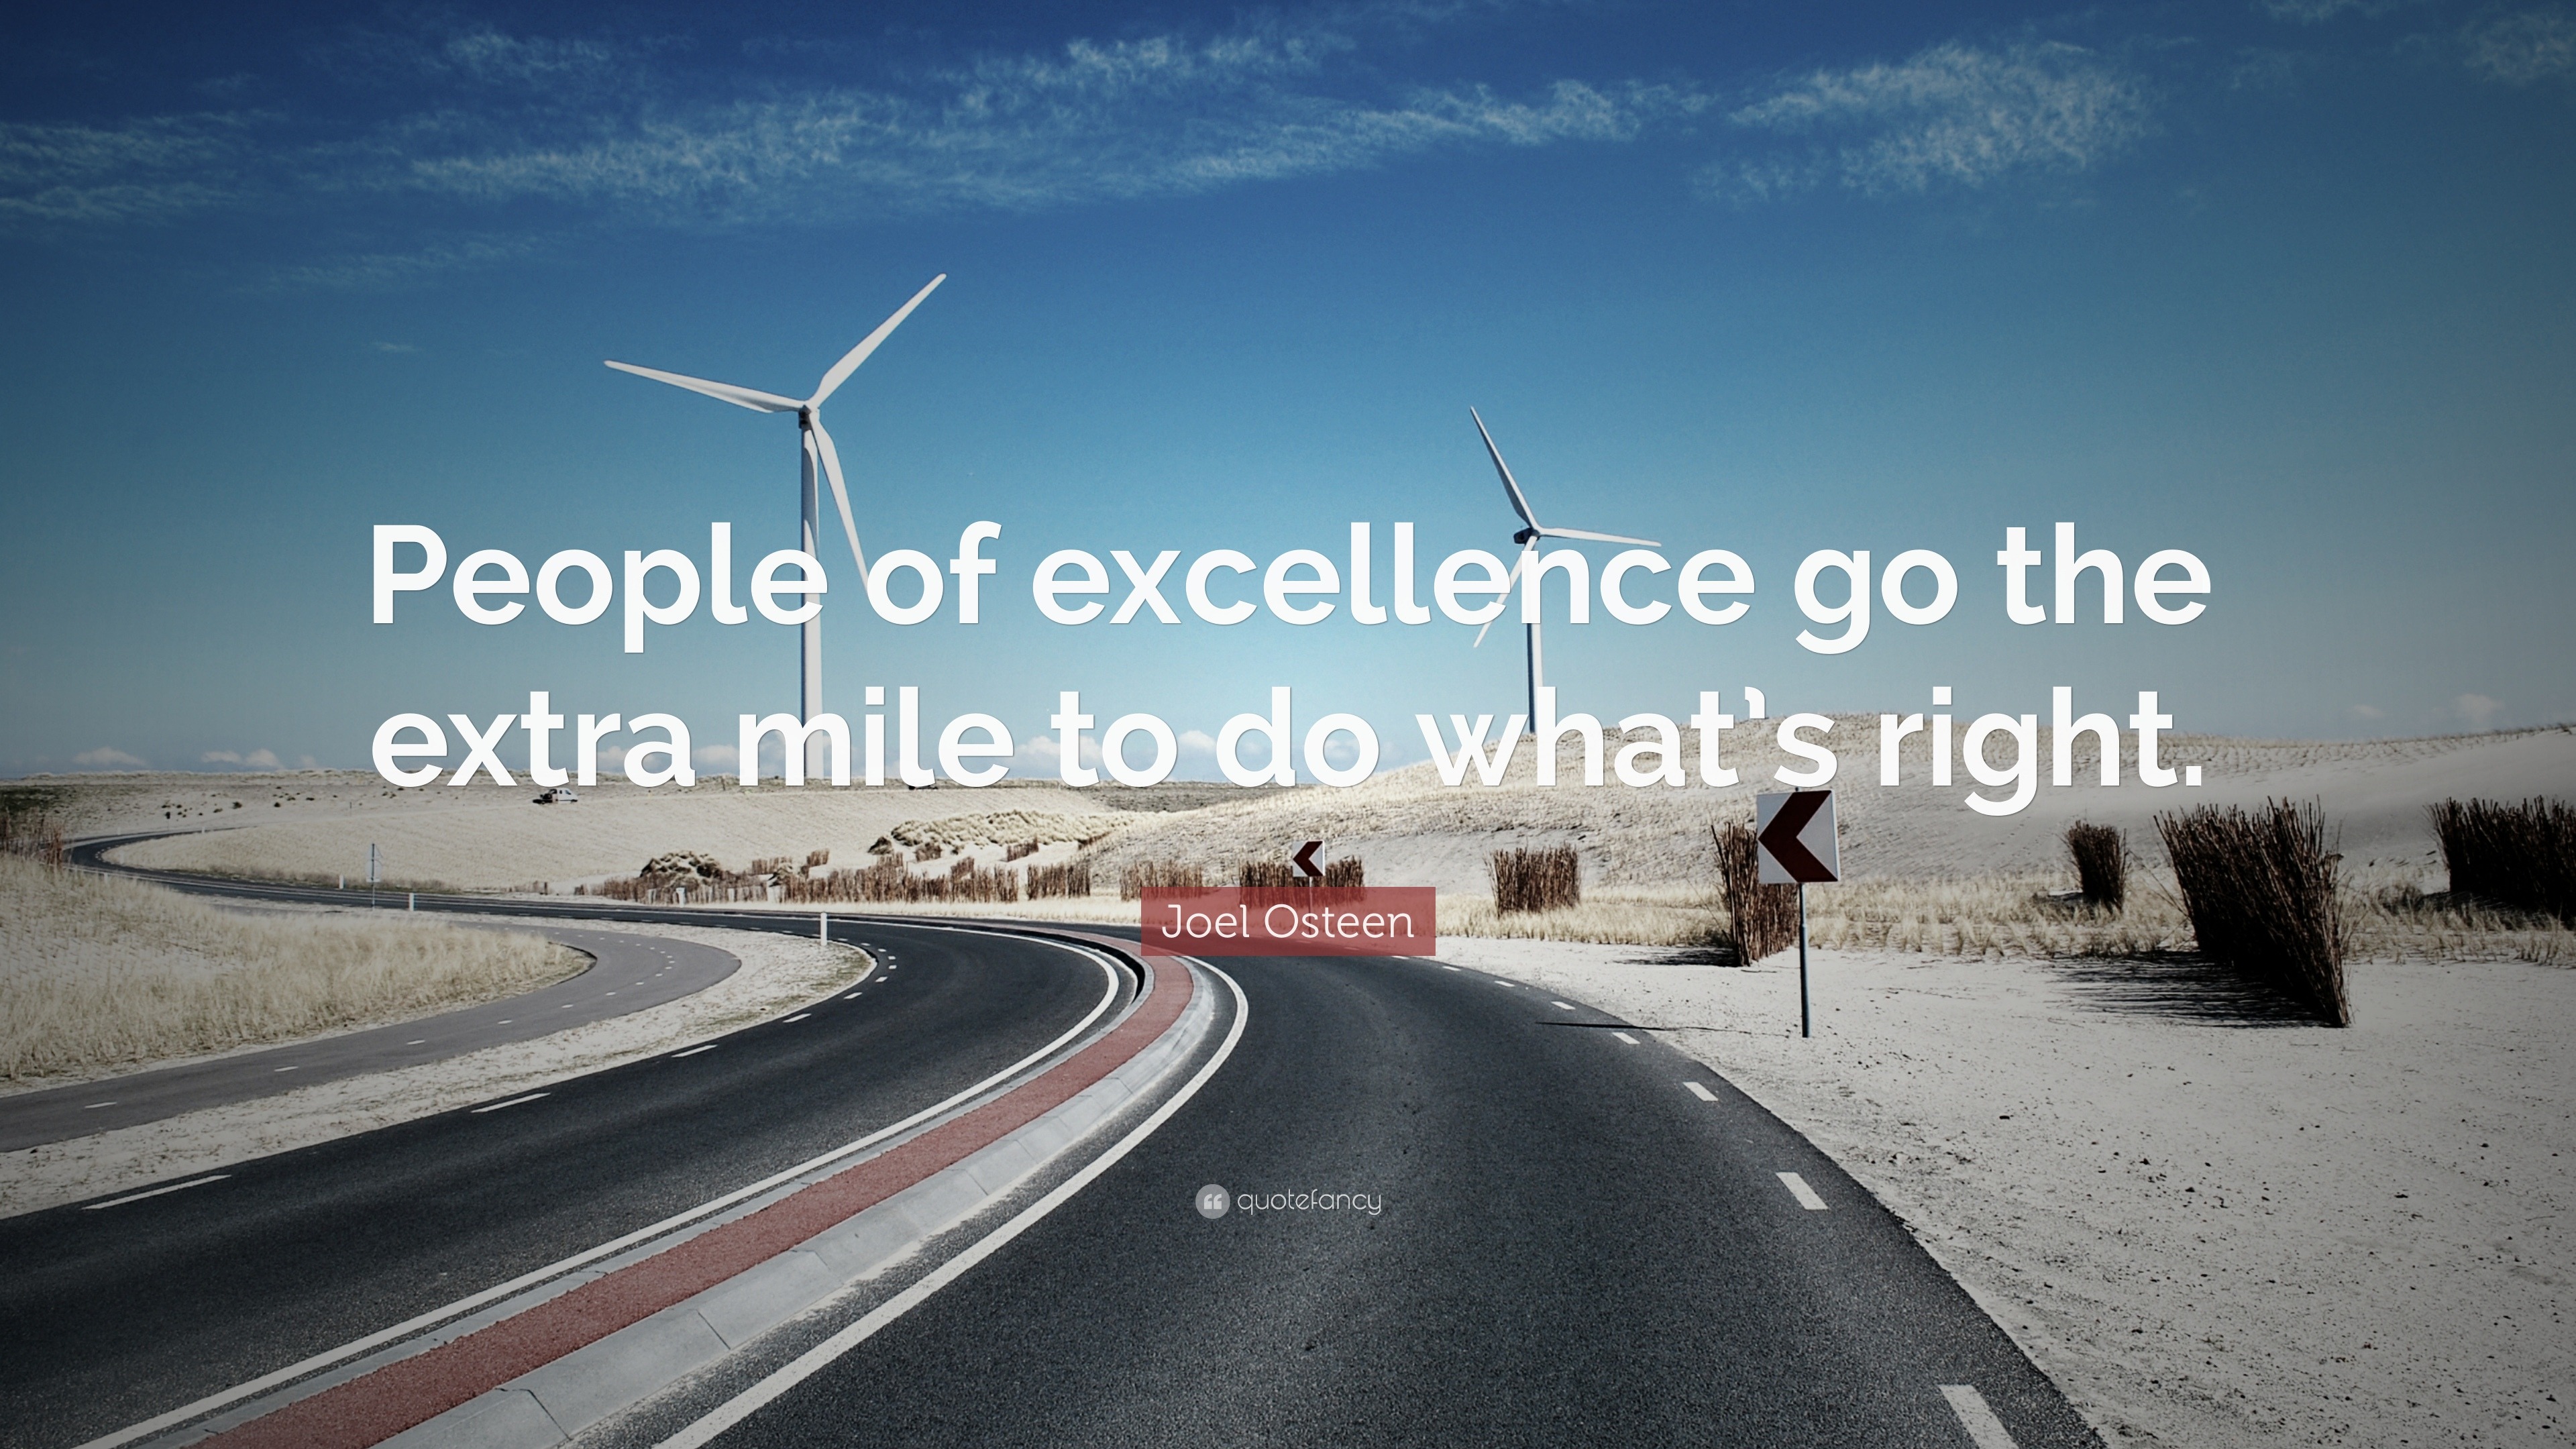 joel-osteen-quote-people-of-excellence-go-the-extra-mile-to-do-what-s-right-22-wallpapers